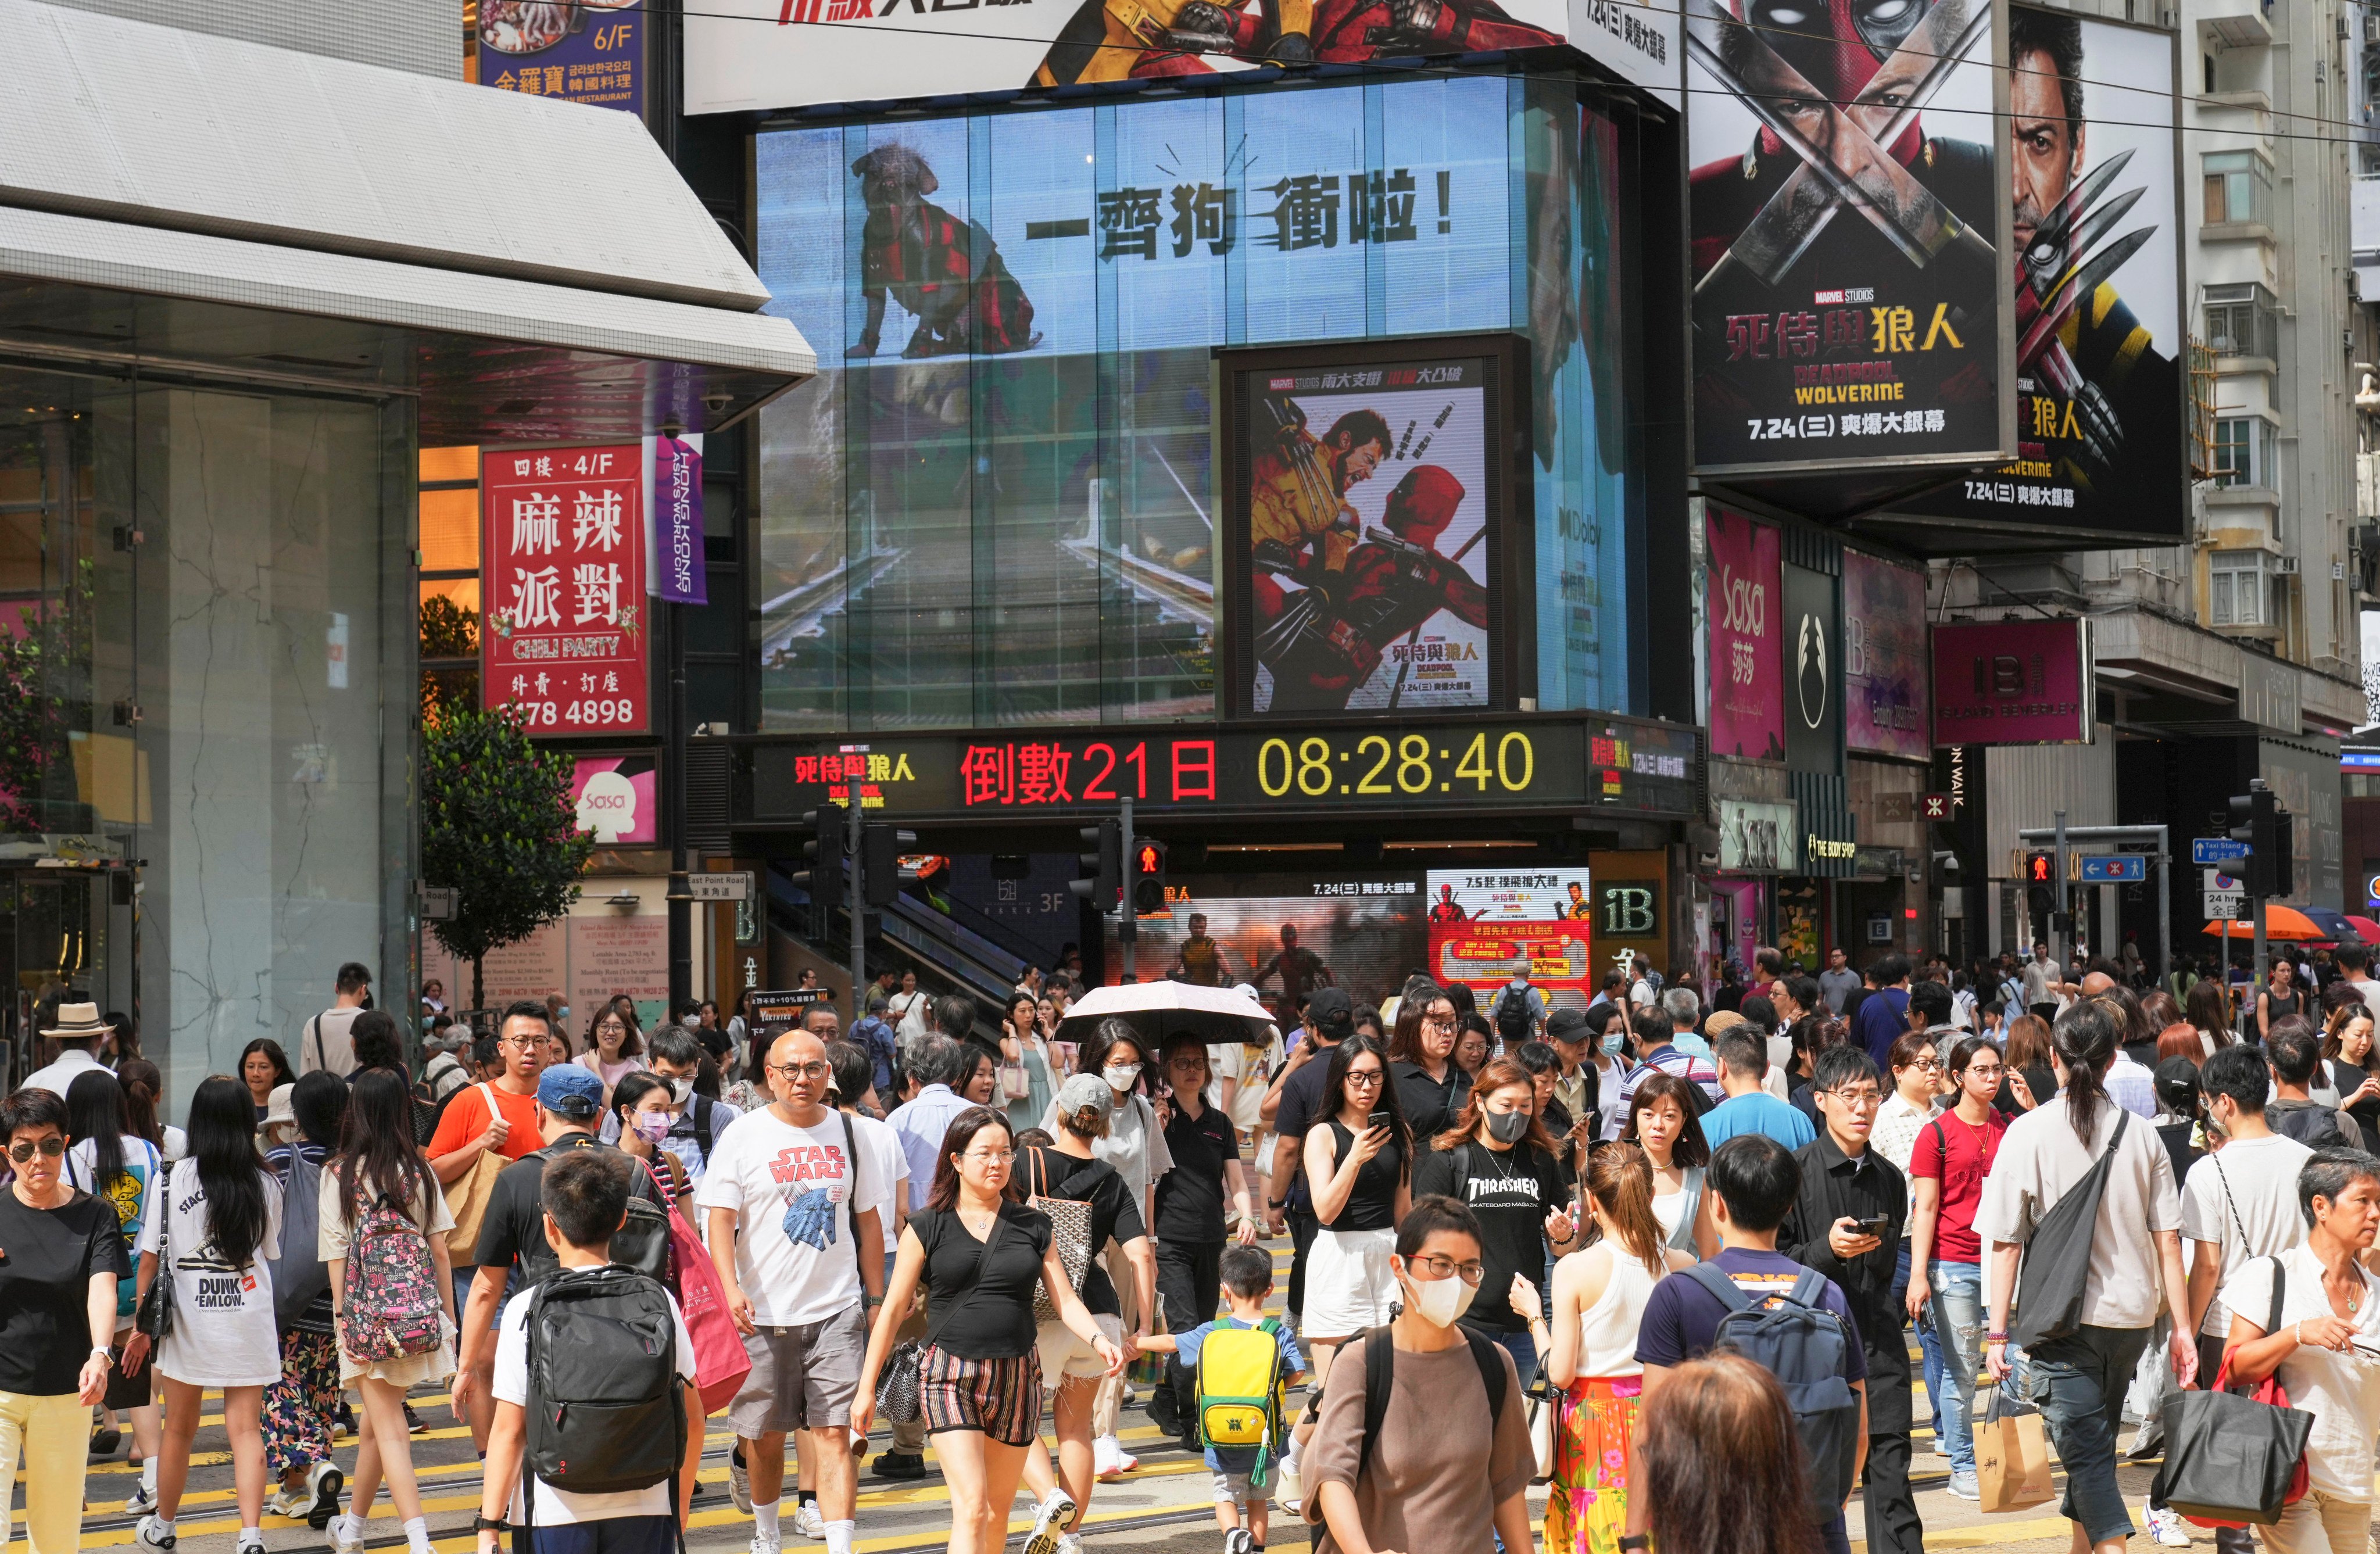 Fears have been expressed that easier access to mainland China for permanent residents with foreign passports could hit the Hong Kong economy. Photo: Sam Tsang